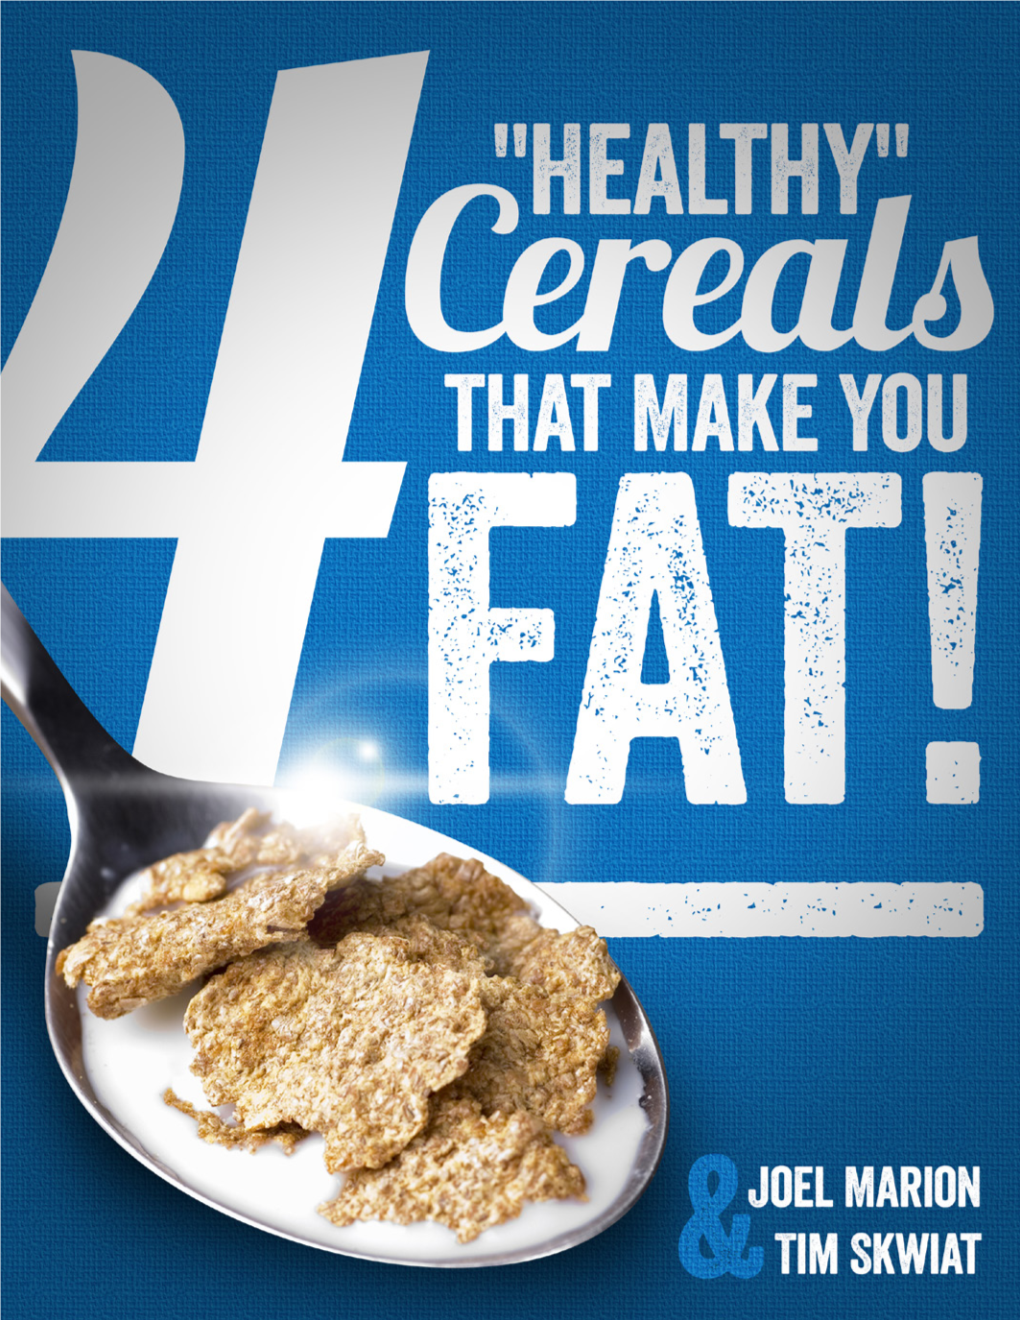 4 Healthy Cereals That Make You